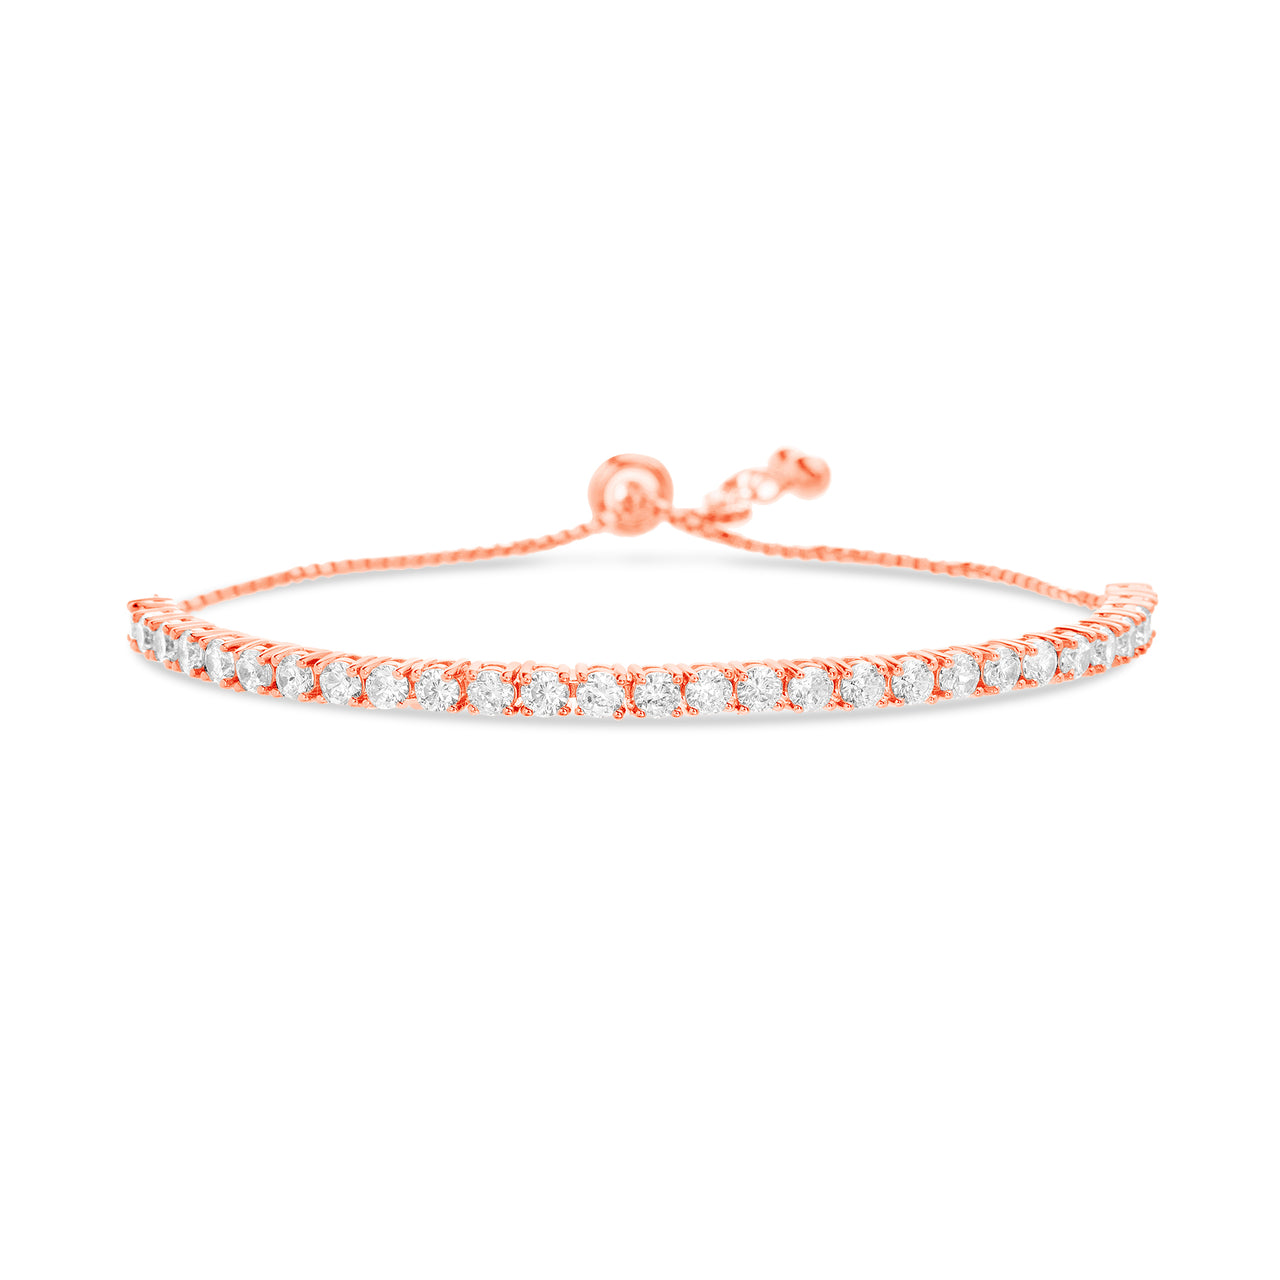 6-8" Round Cubic Zirconia Bridal Gift Adjustable Bolo Tennis Bracelet for Women in Rose Gold Plated 925 Sterling Silver ( Pink )